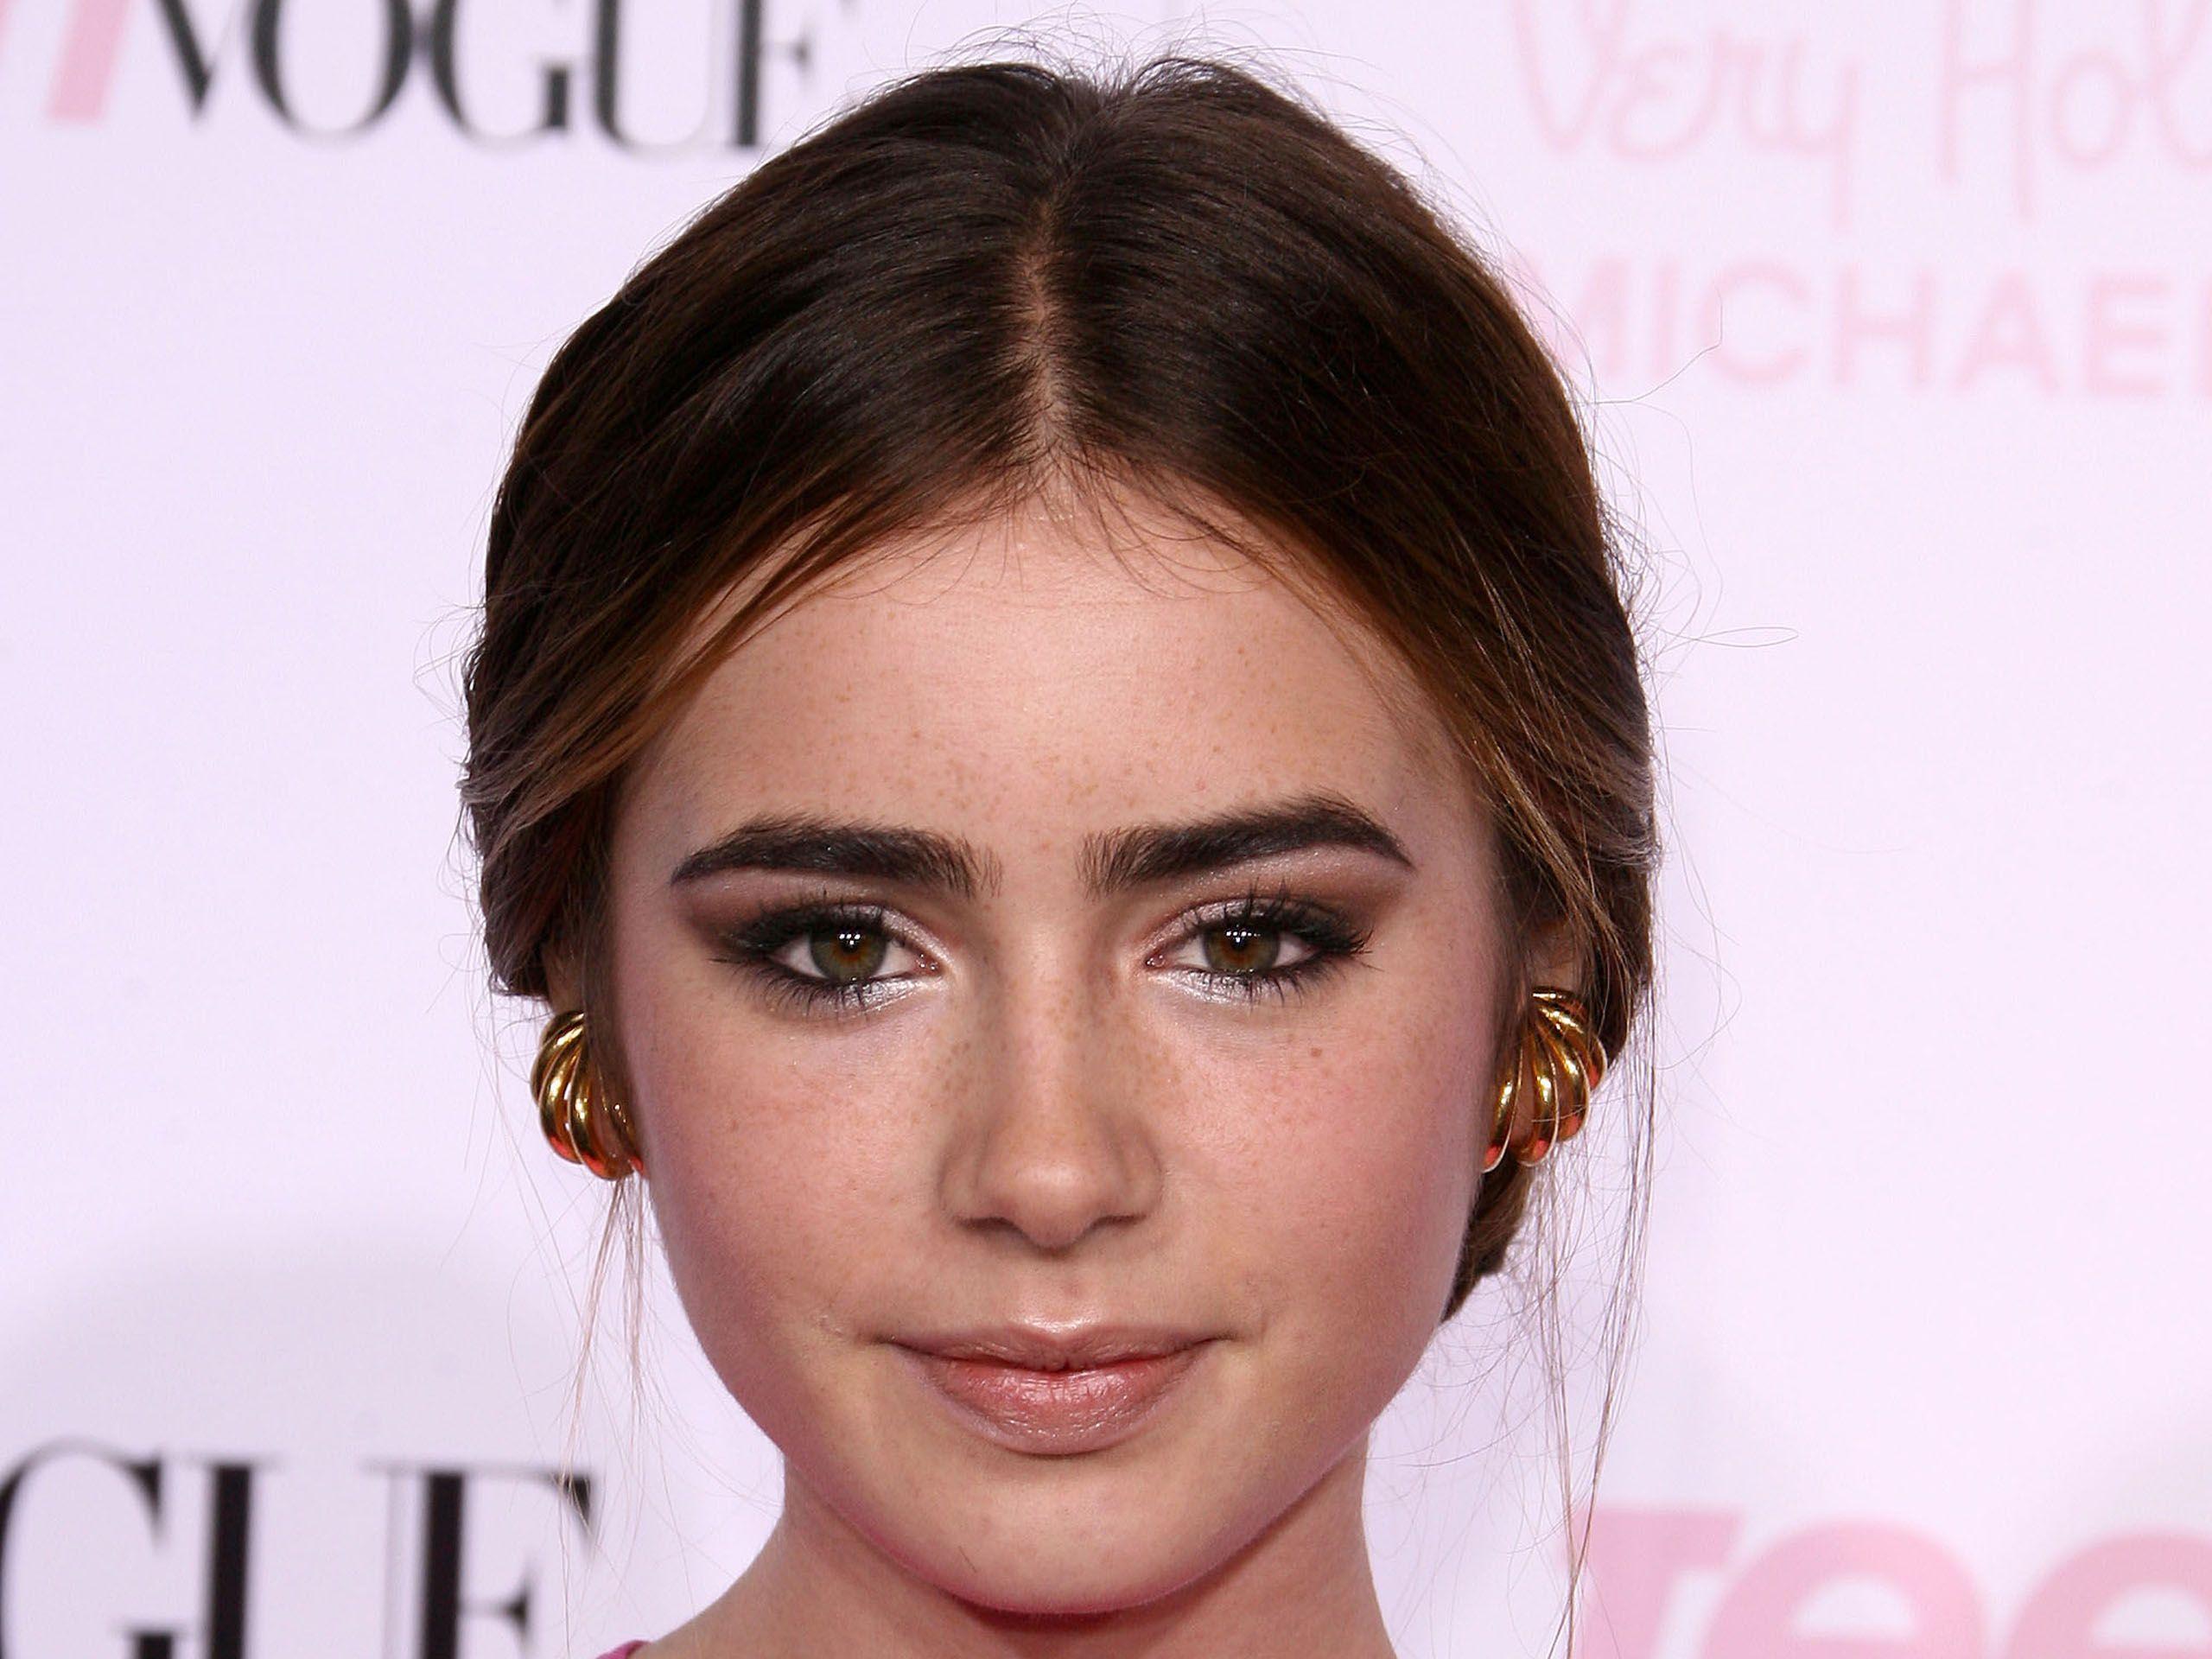 Lily Collins Beach Image & Picture